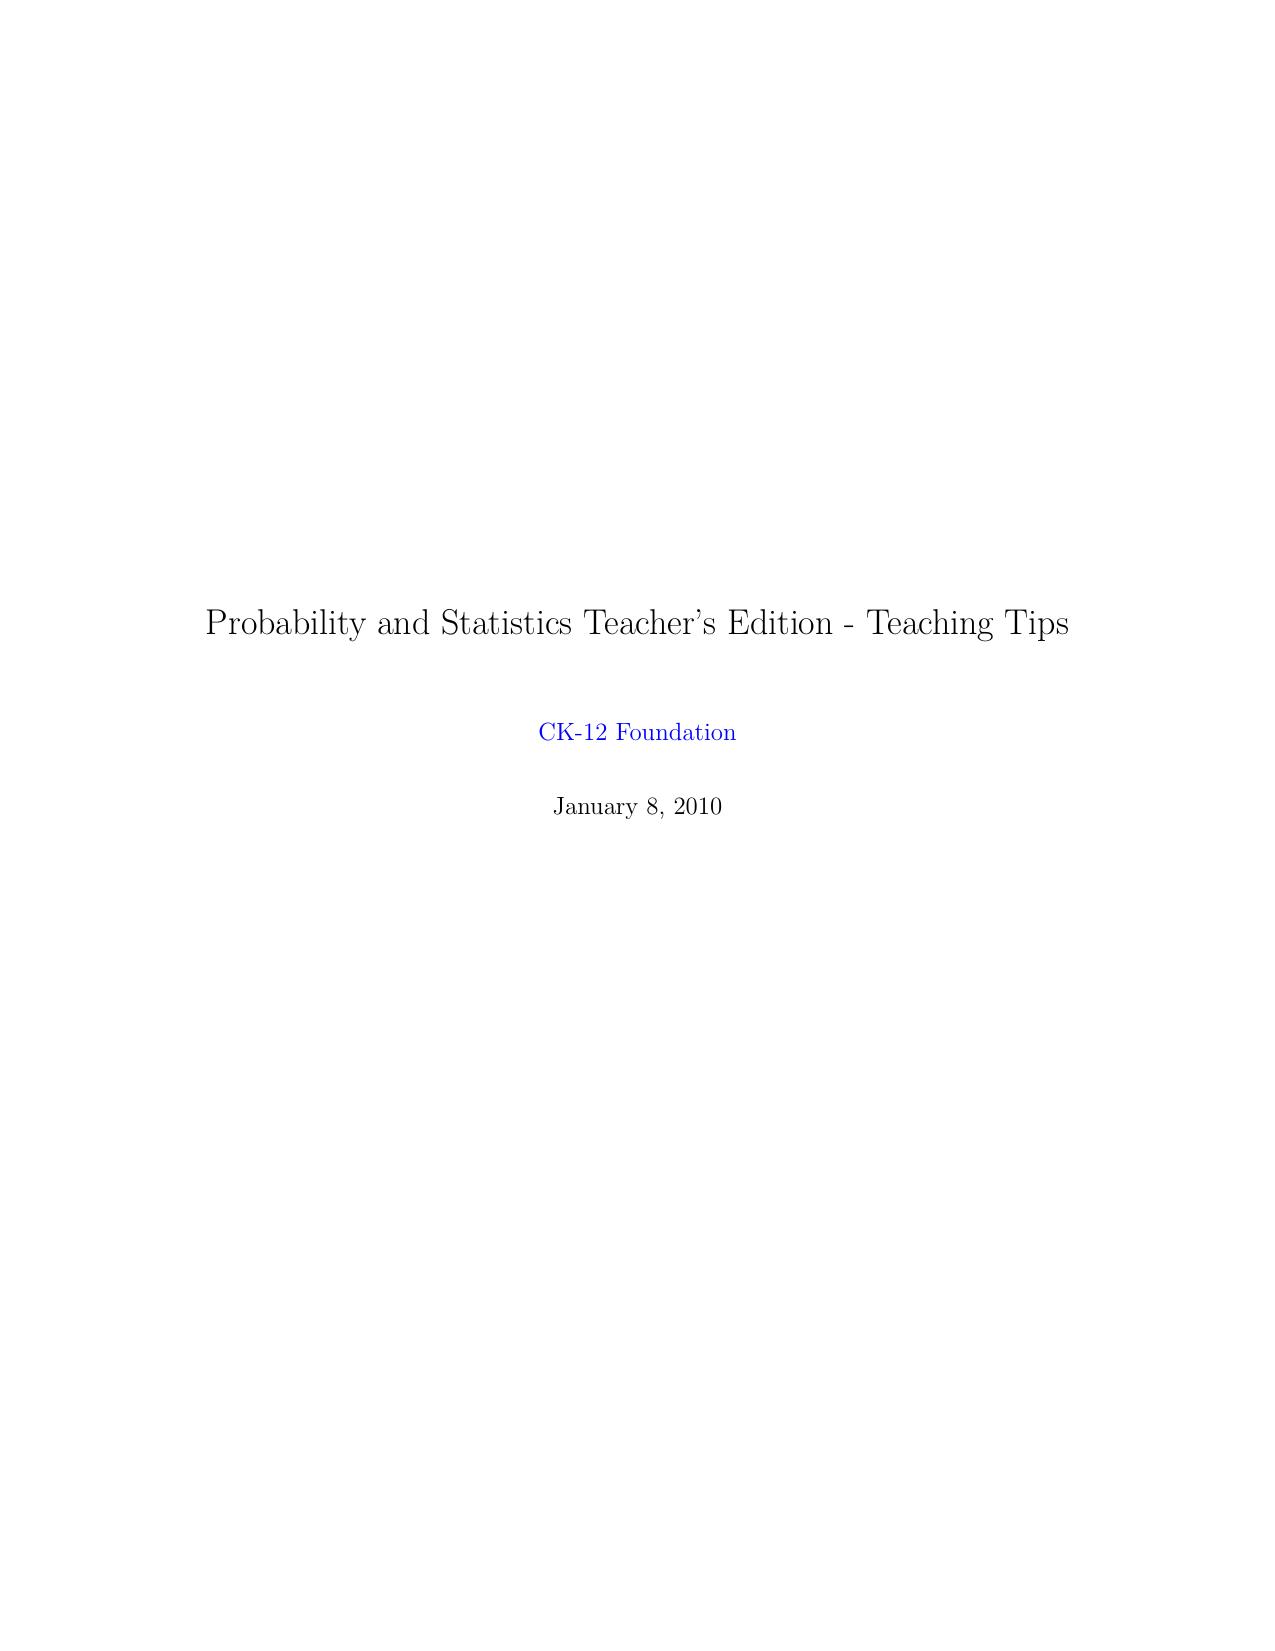 Probability and Statistics Teacher’s Edition - Teaching Tips